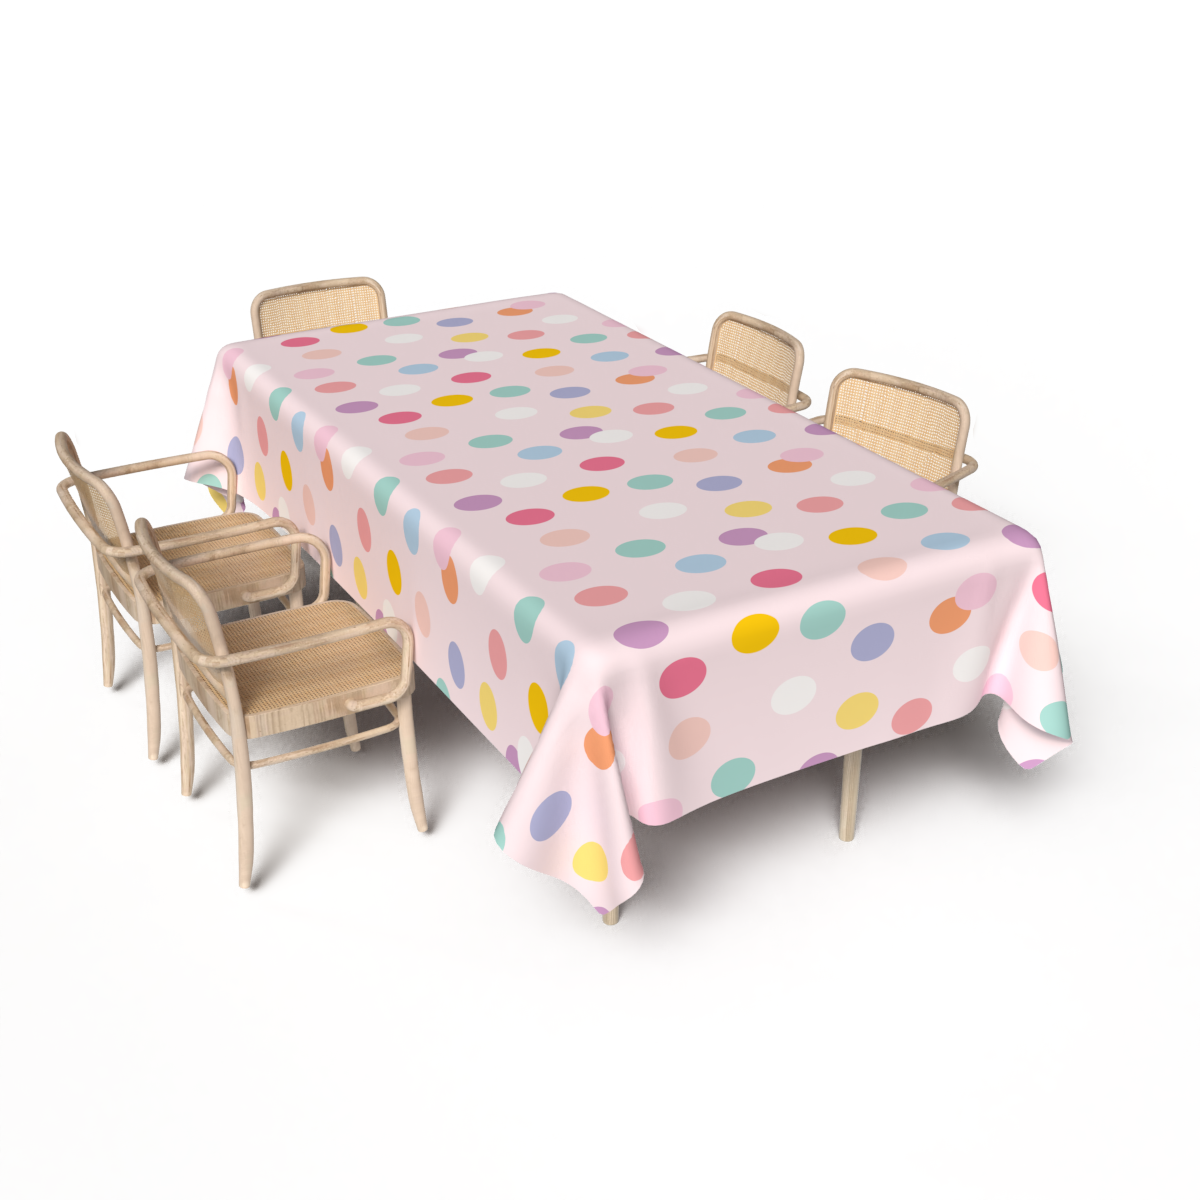 Party ˈBirthday Themedˈ Tablecloth